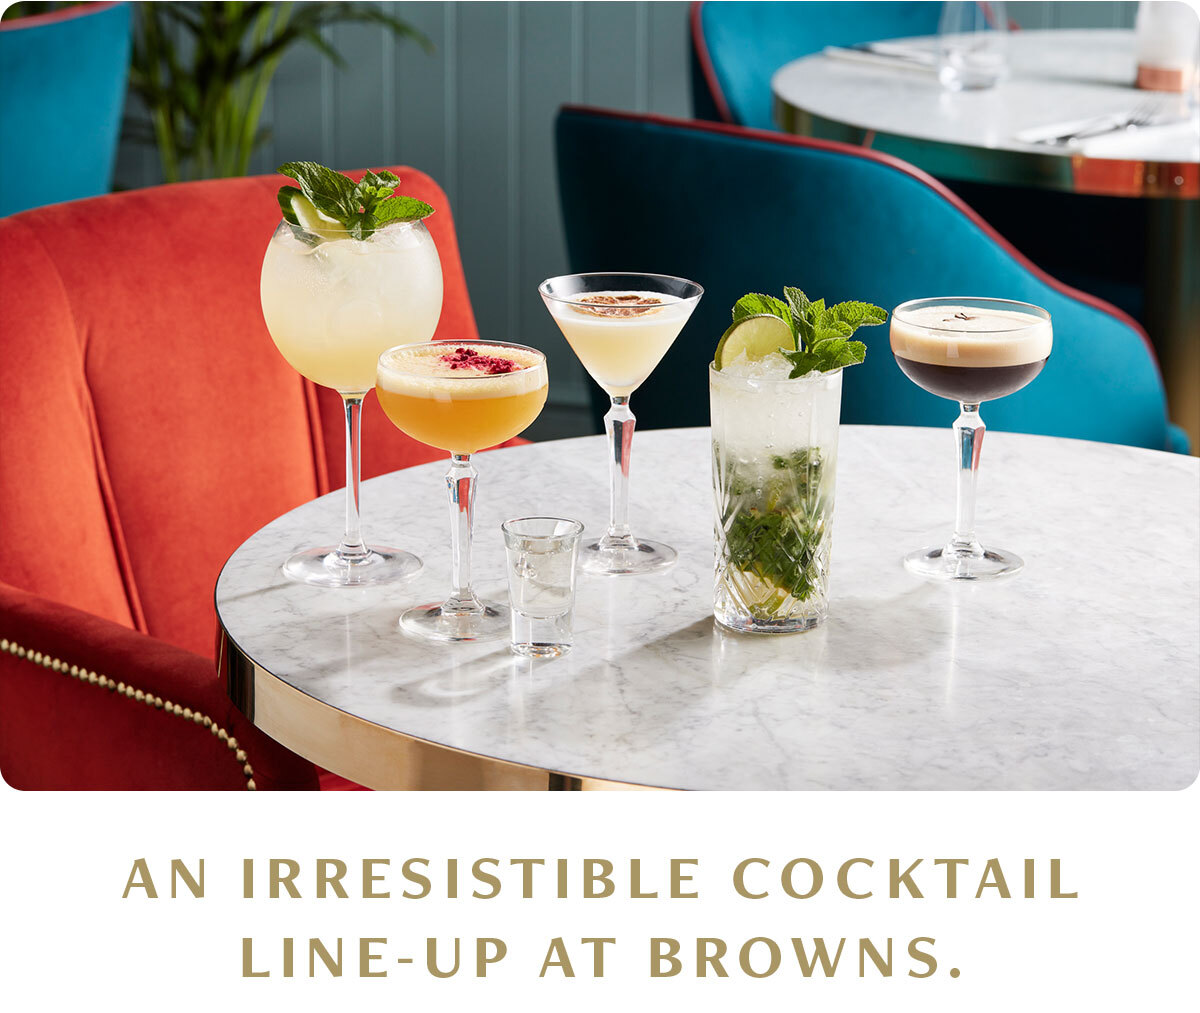 Introducing our gorgeous new Drinks Menu